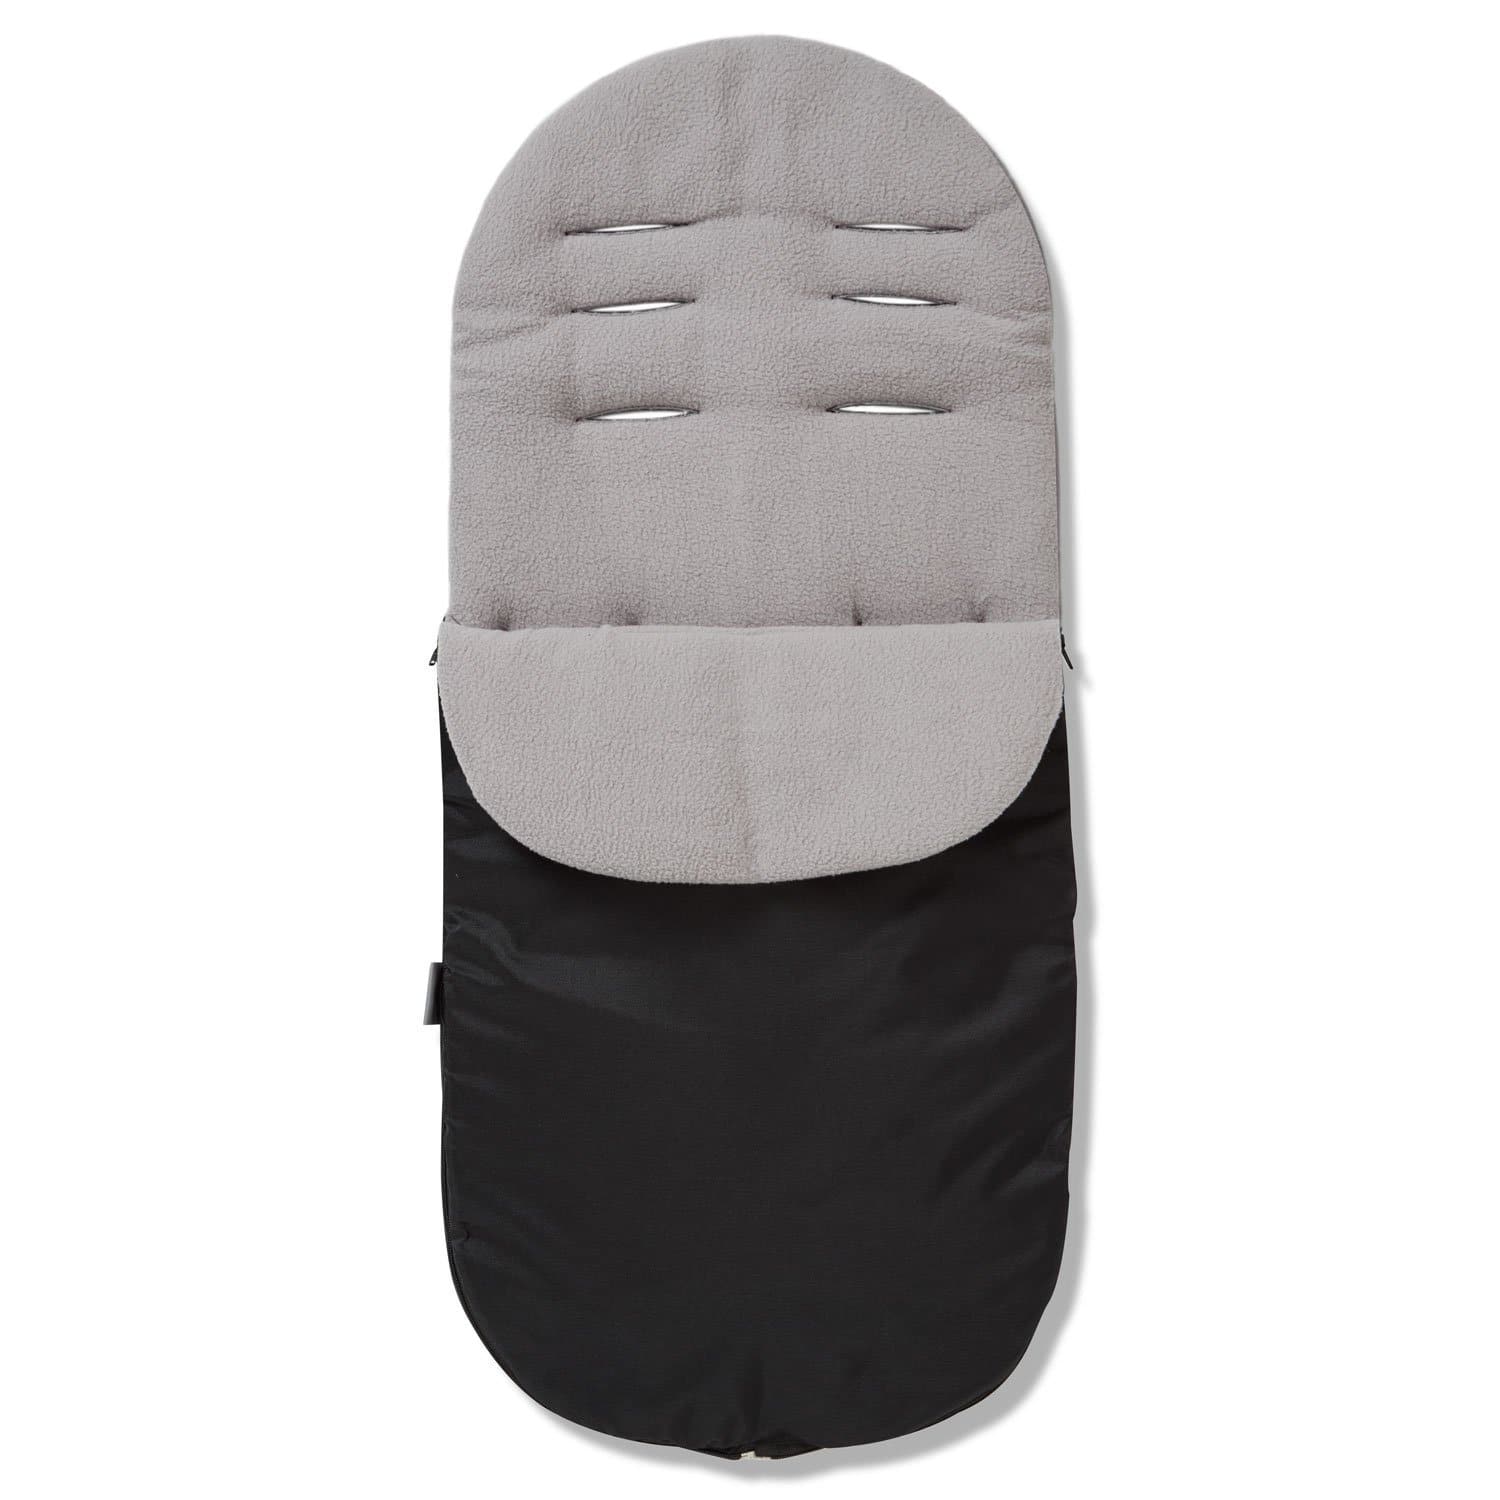 Footmuff / Cosy Toes Compatible with Babystyle - Grey / Fits All Models | For Your Little One